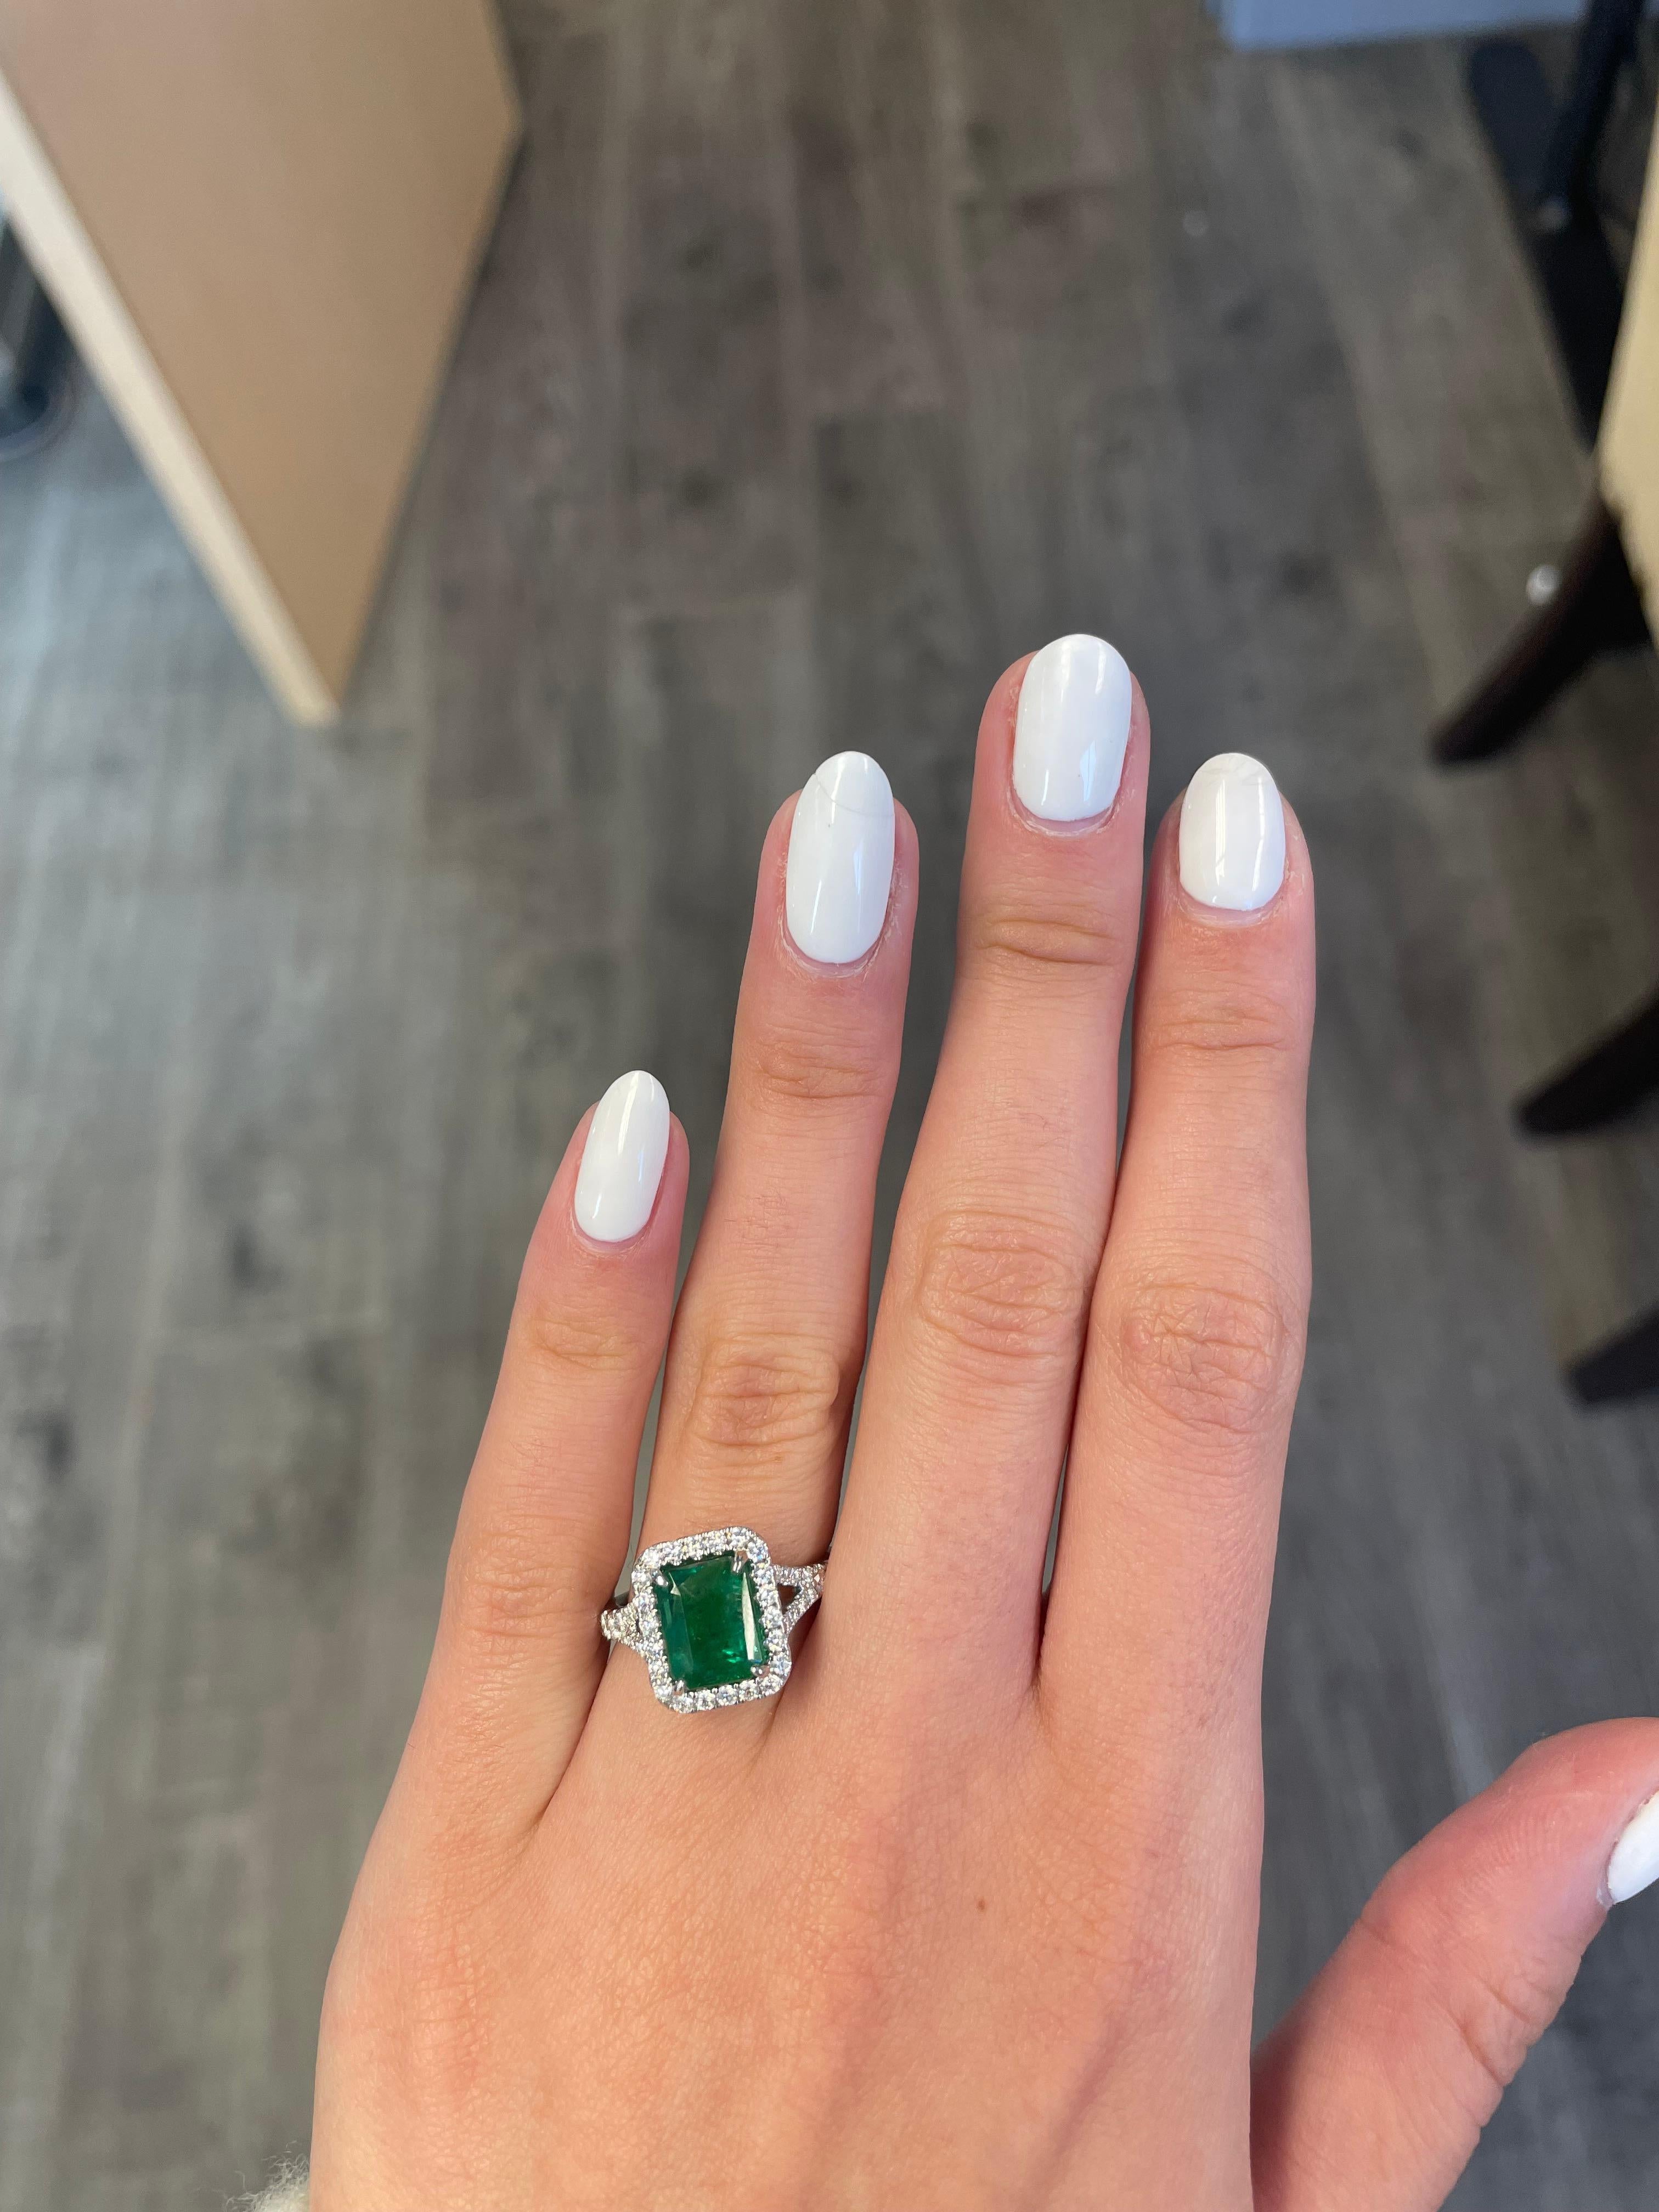 Stunning modern emerald and diamond halo ring with split shank.
Approximately 3.30 carats total gemstone weight.
Approximately 2.50 carat emerald cut emerald, F2. Complimented by 54 round brilliant diamonds, approximately 0.80 carats, G/H color and